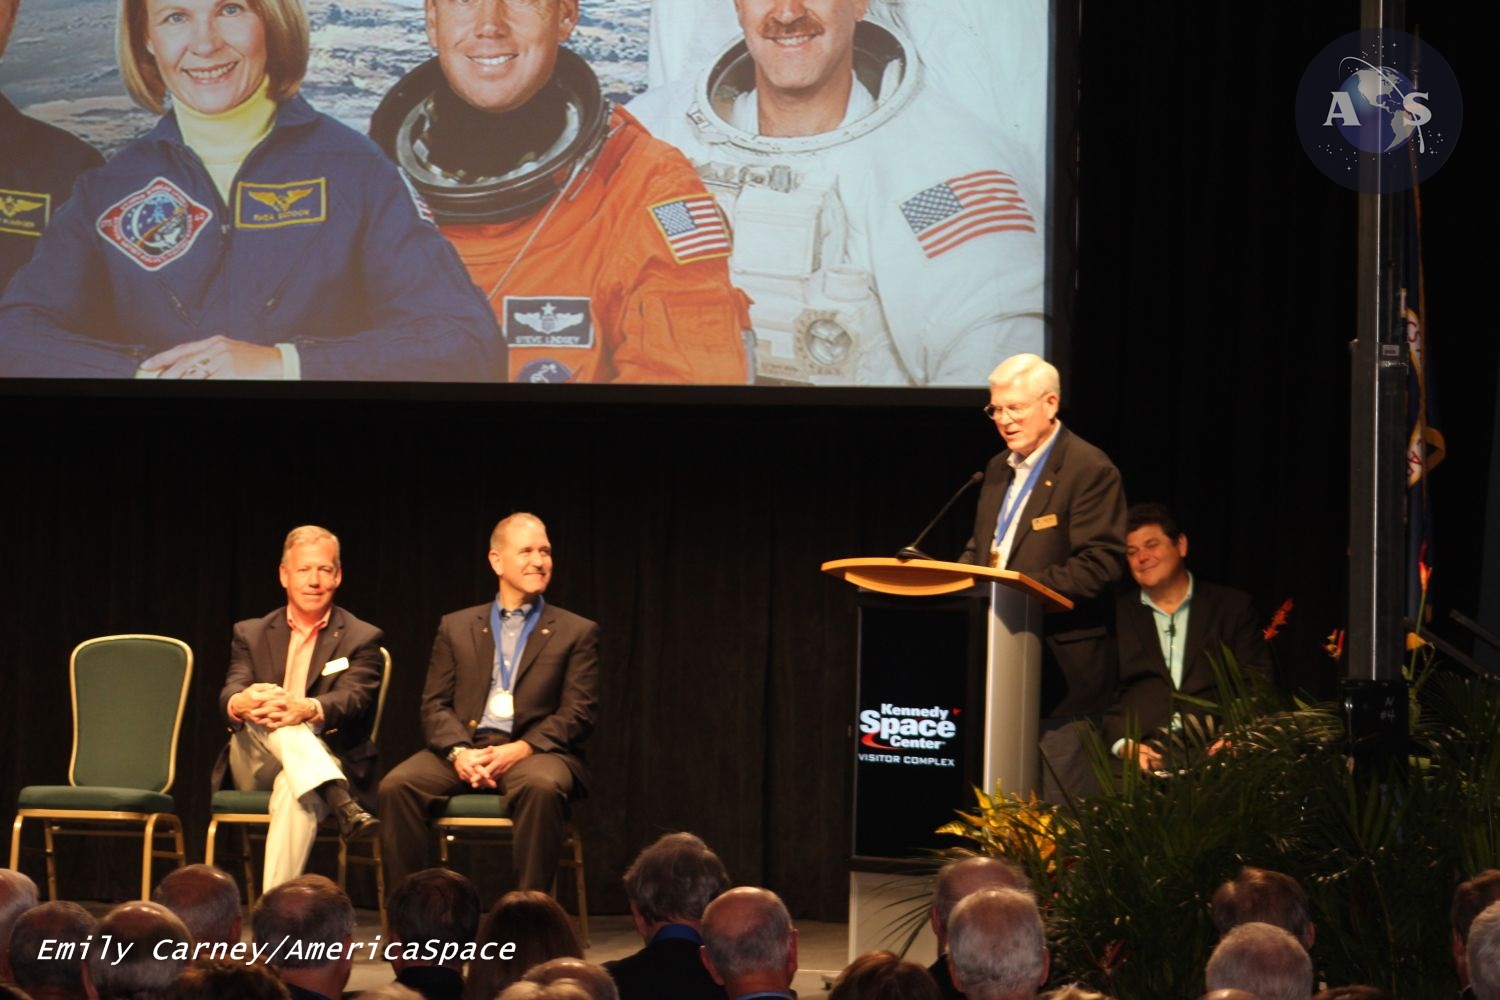 Astronaut Mike Coats (at podium) gives remarks prior to Lindsey's induction (Lindsey is furthest left). Photo Credit: Emily Carney / AmericaSpace 